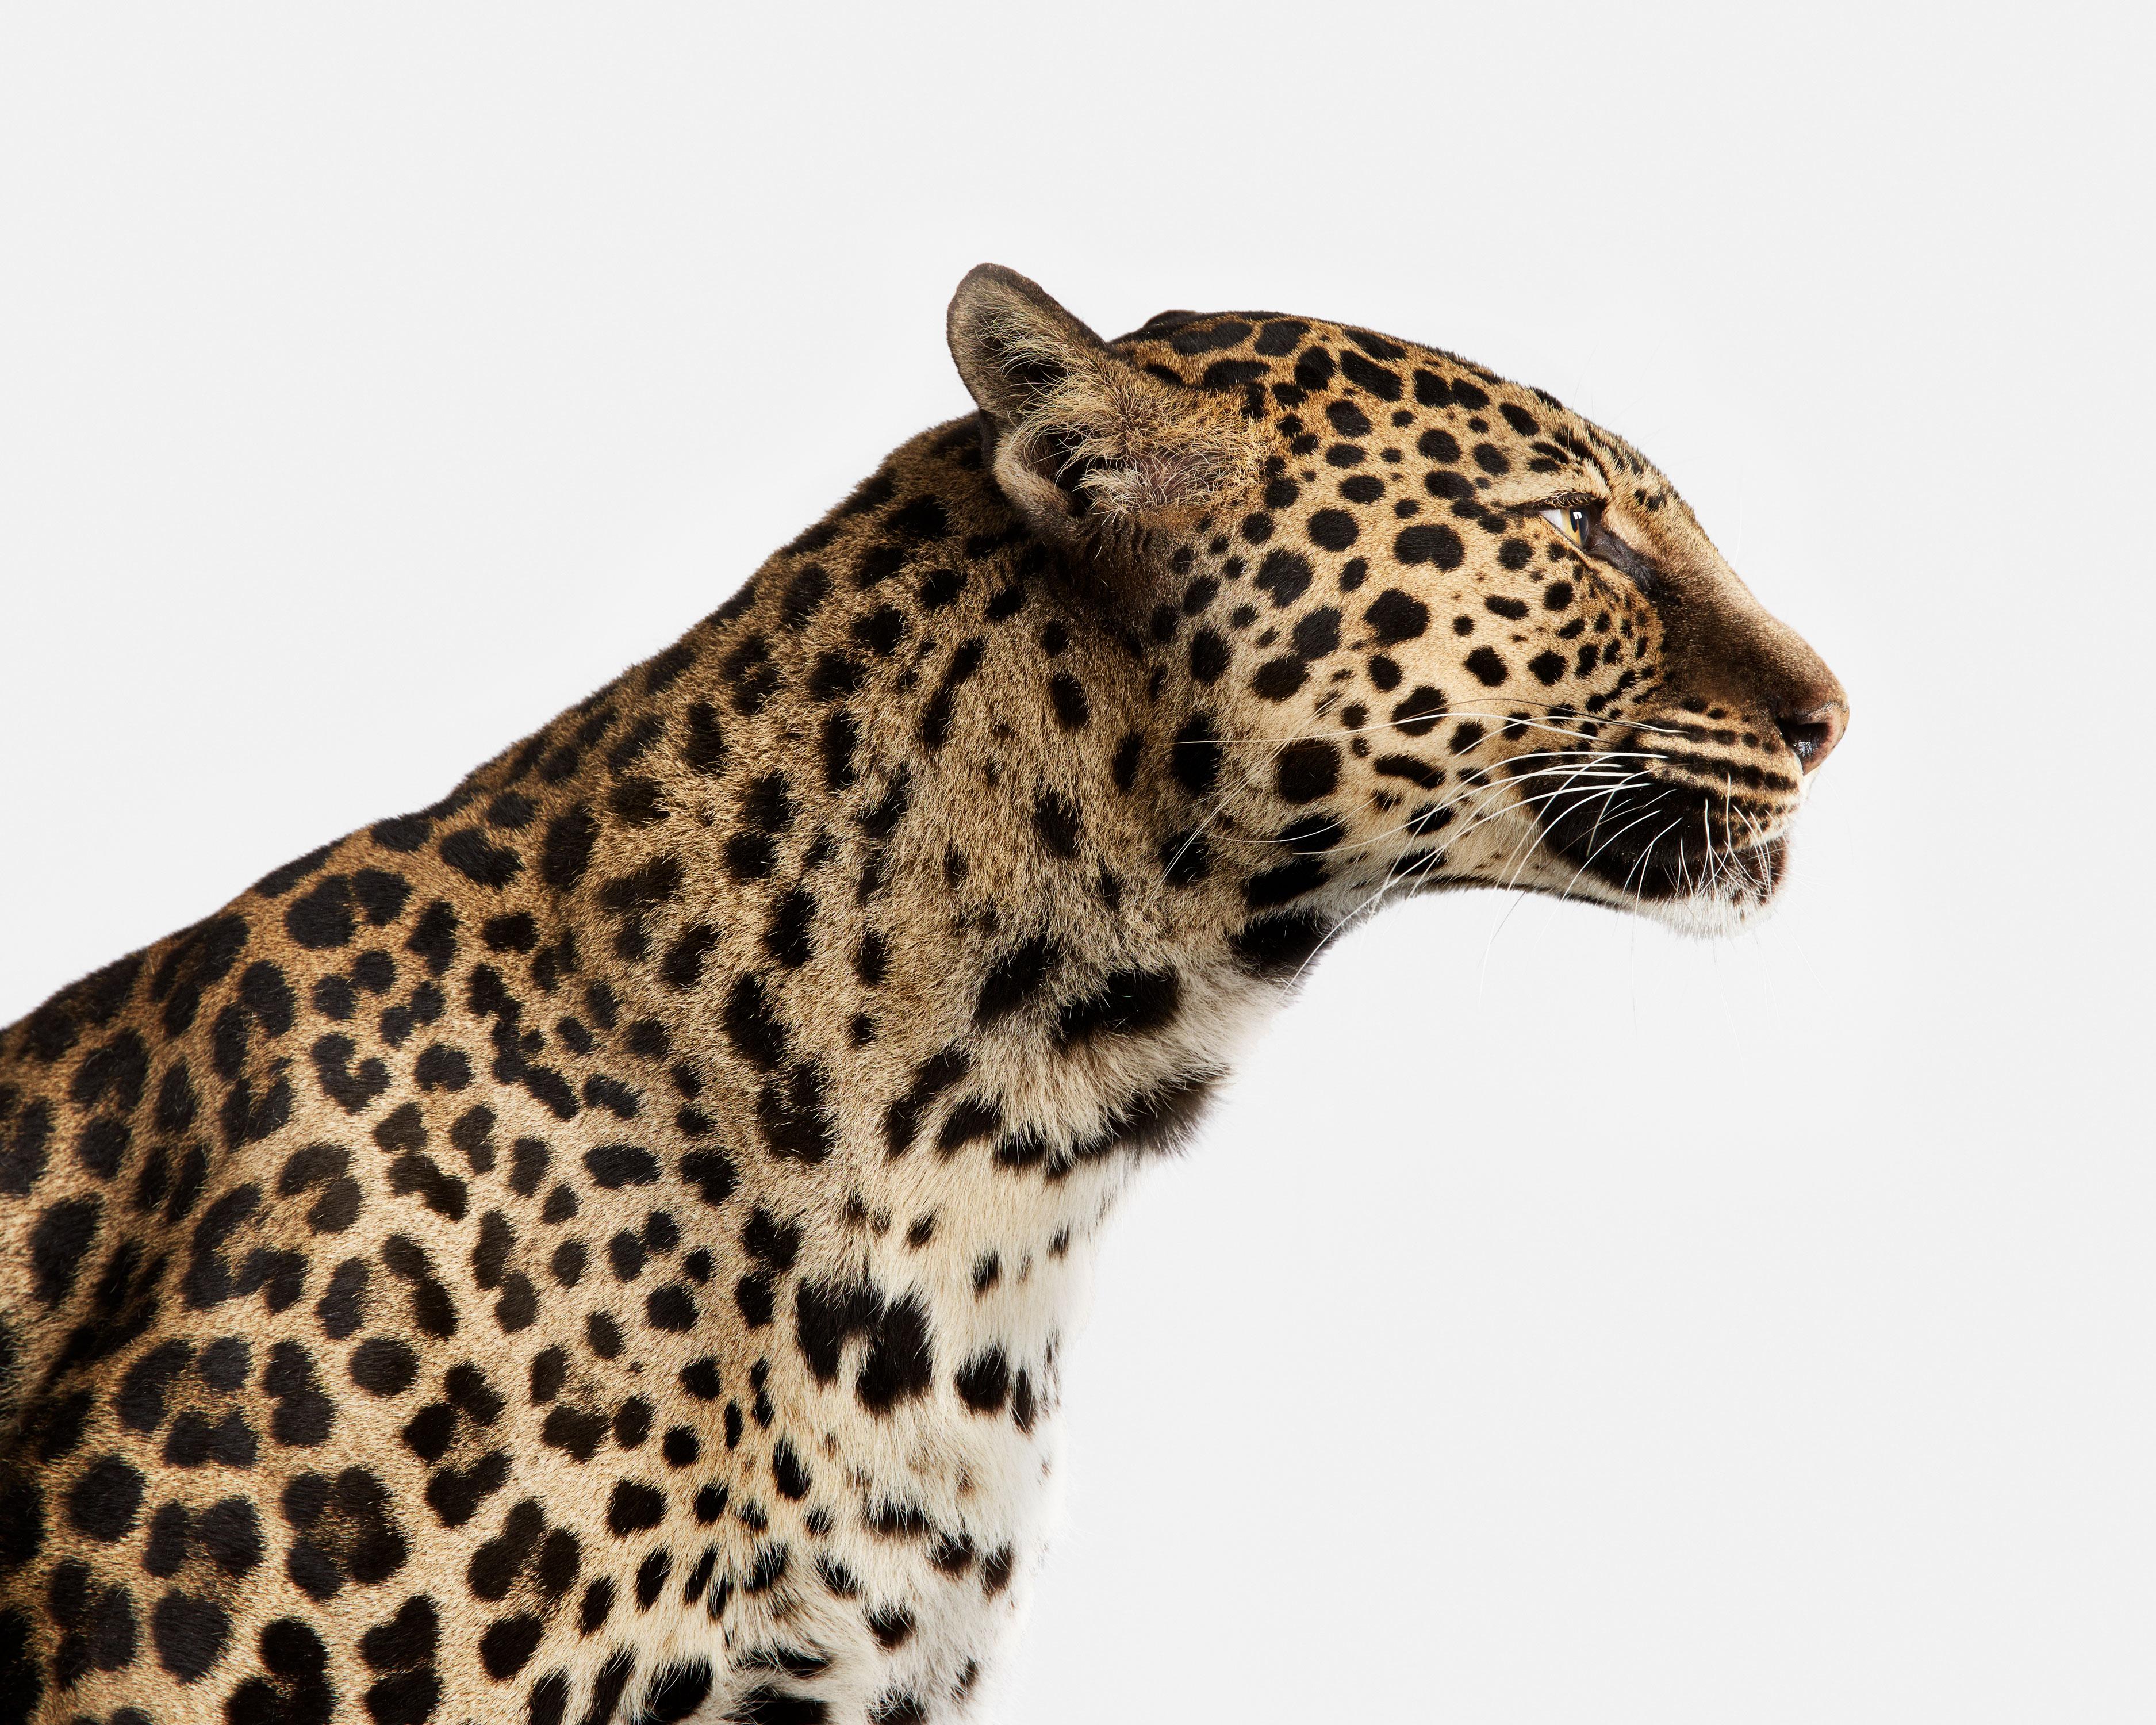 Randal Ford - Spotted Leopard No. 1, Photography 2018, Printed After